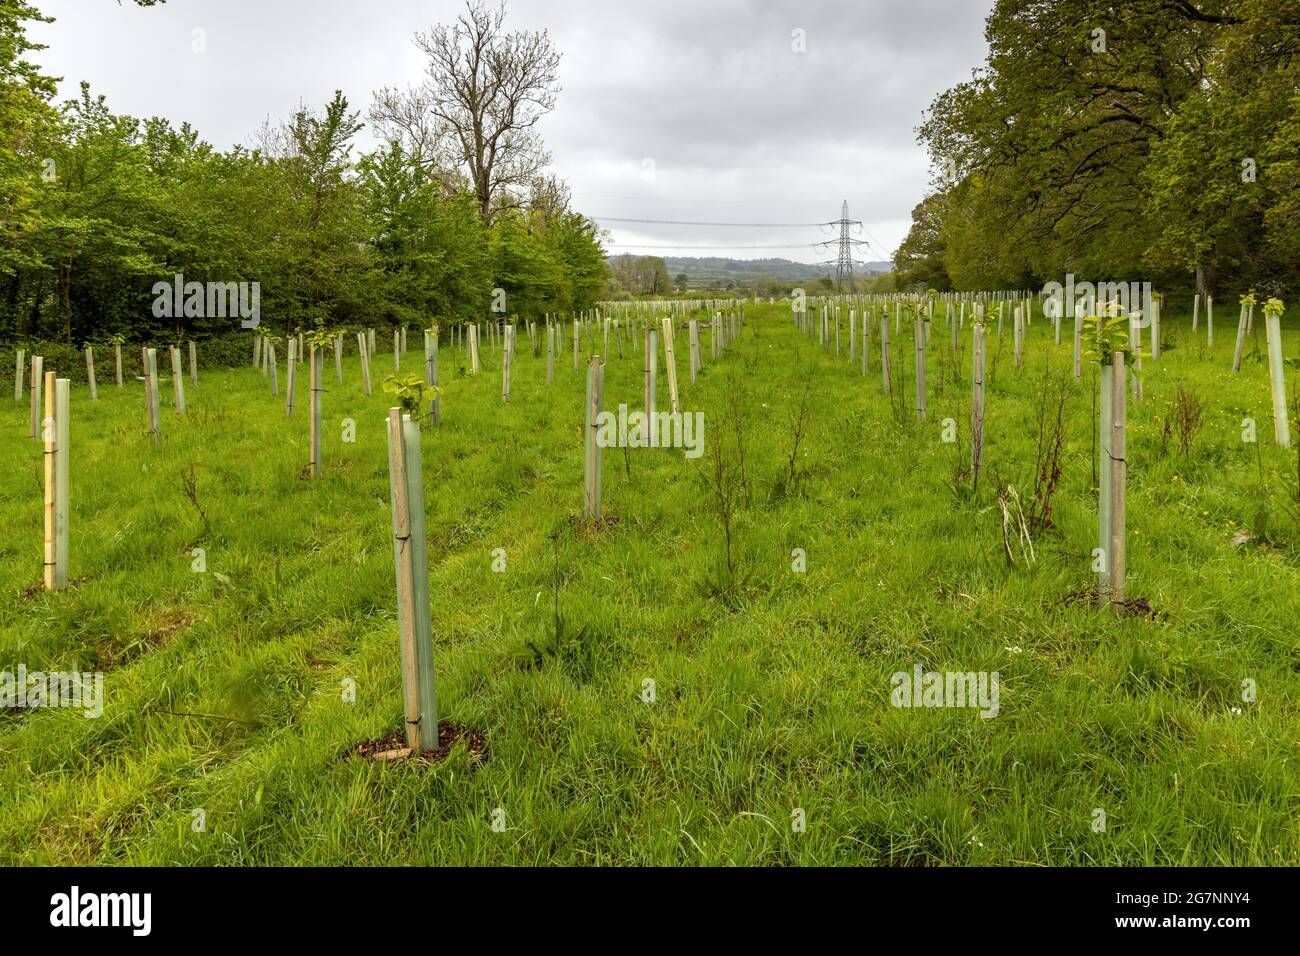 Newly planted trees in a field near Wimborne in Dorset. Stock Photo